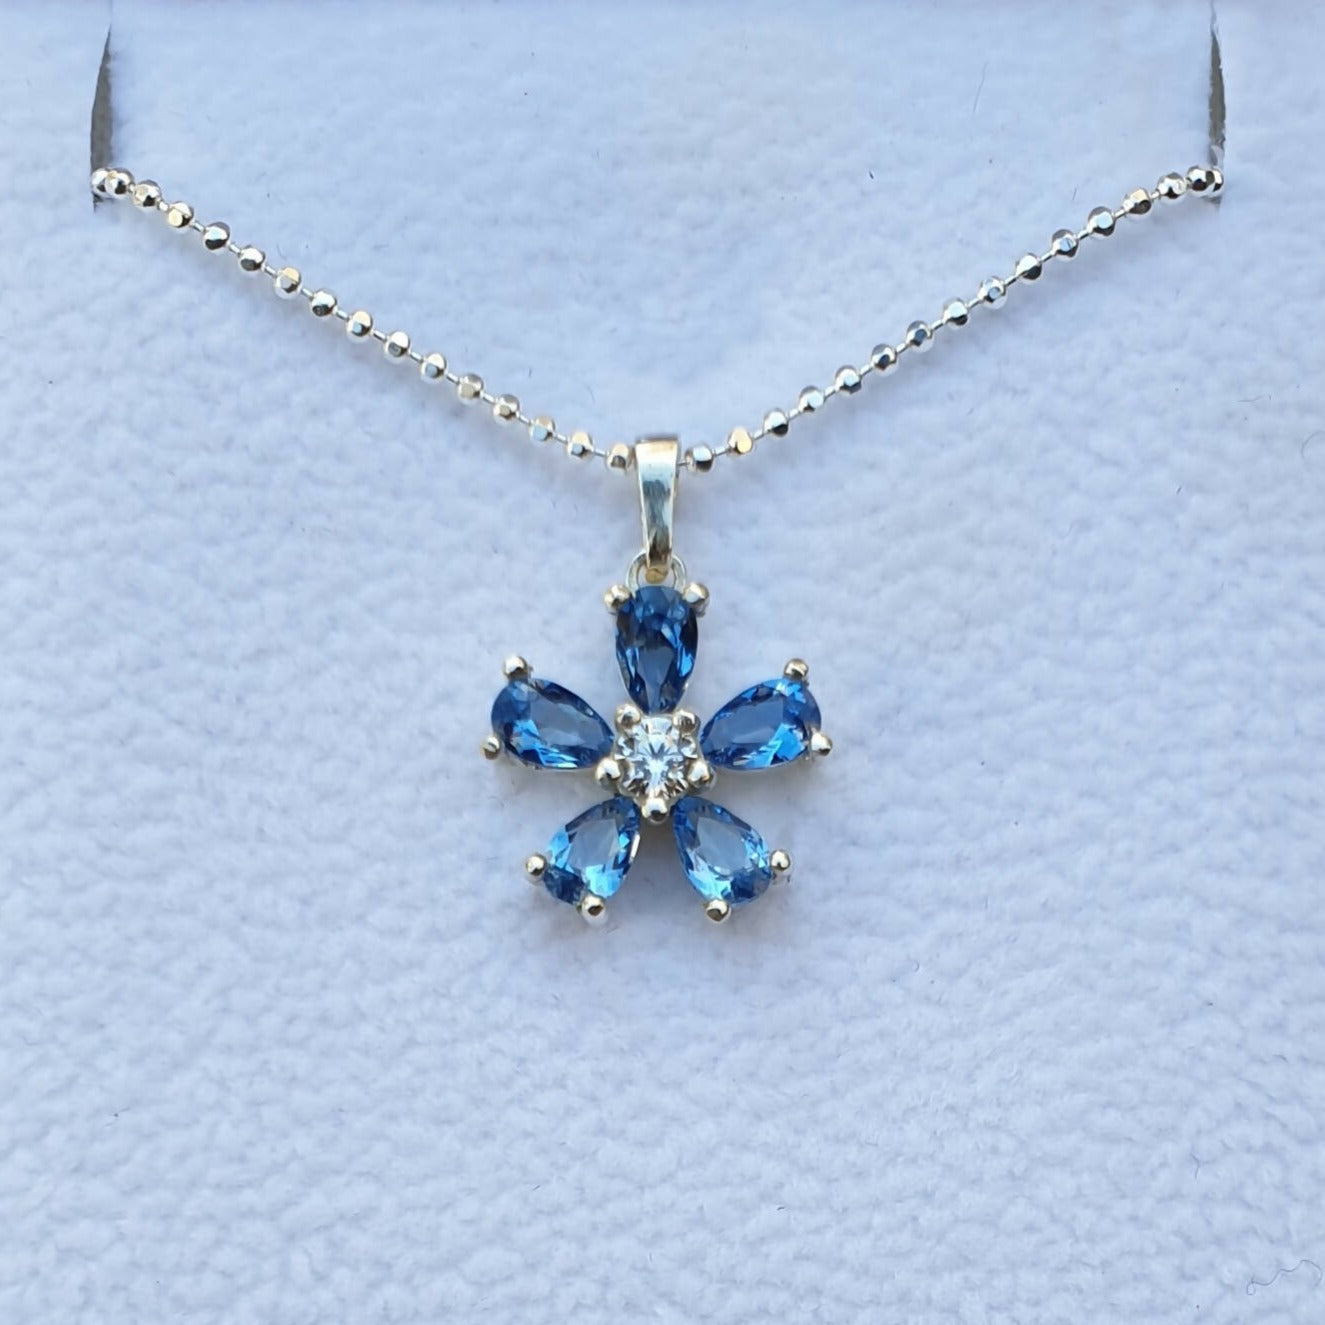 Masonic Necklace - 925 Forget Me Not With Light Blue Semi precious Stones